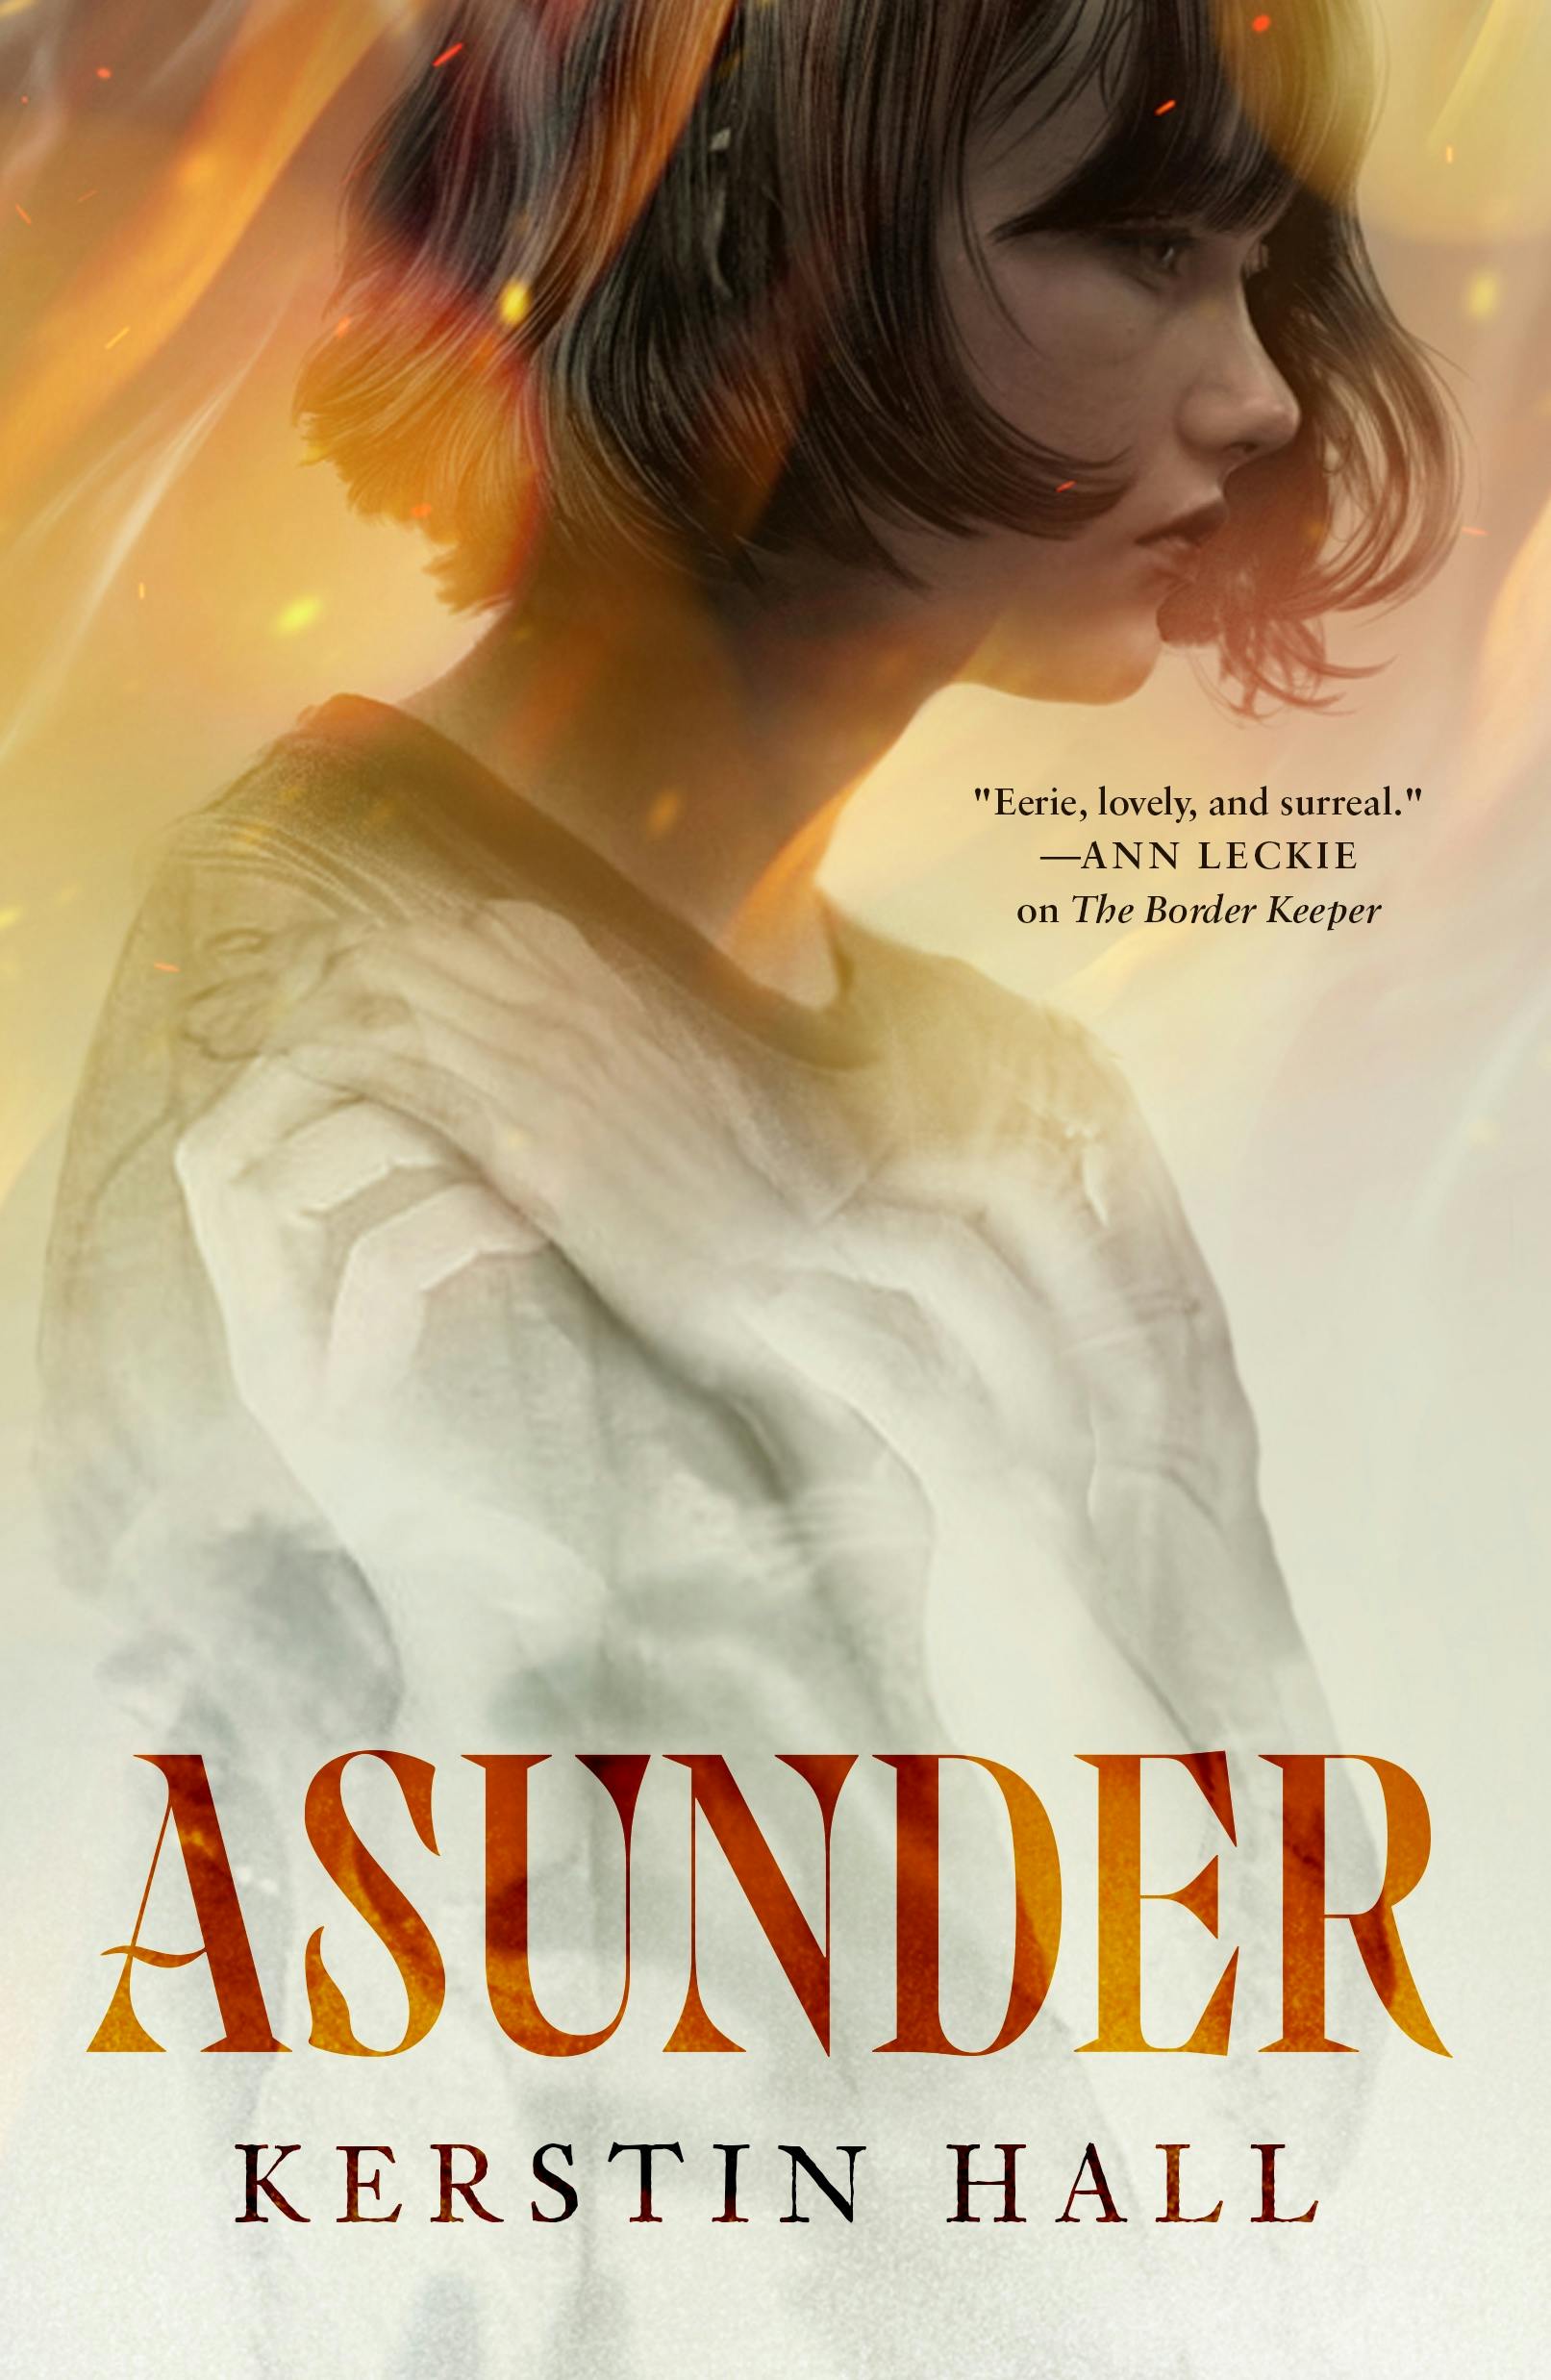 Cover for the book titled as: Asunder